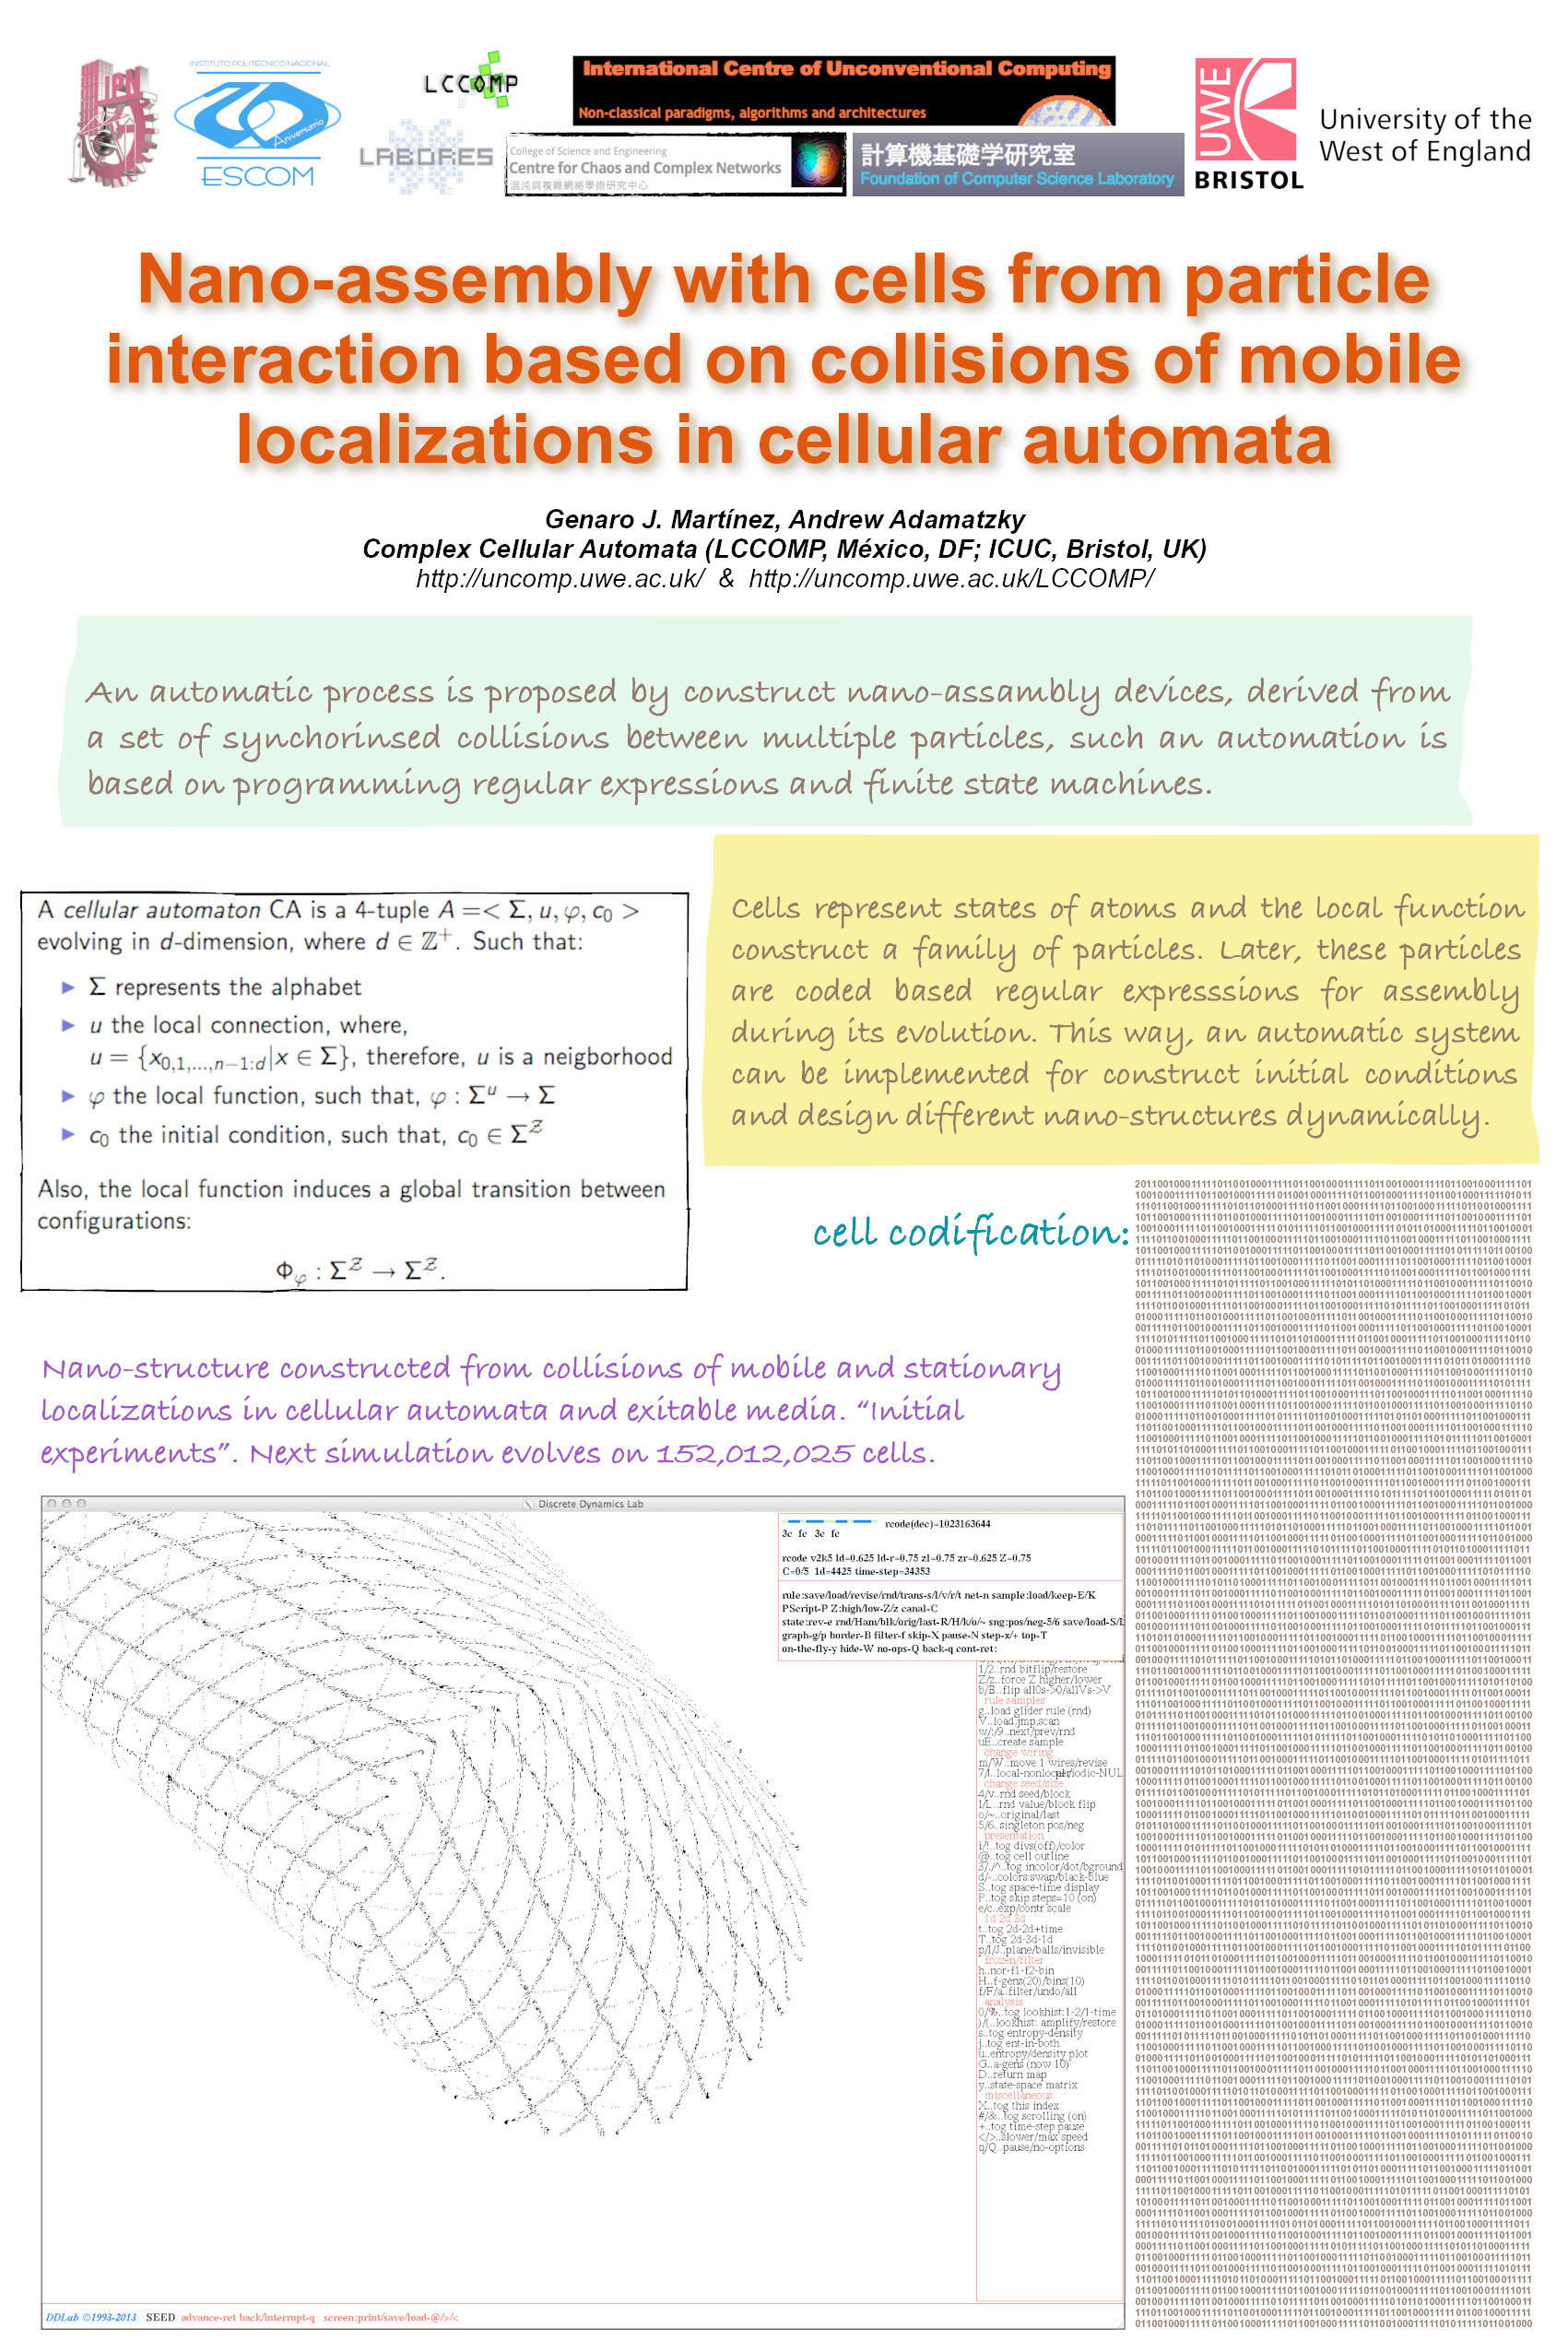 Nano-assembly with cells from particle interaction based on collisions of mobile localizations in cellular automata Thumbnail